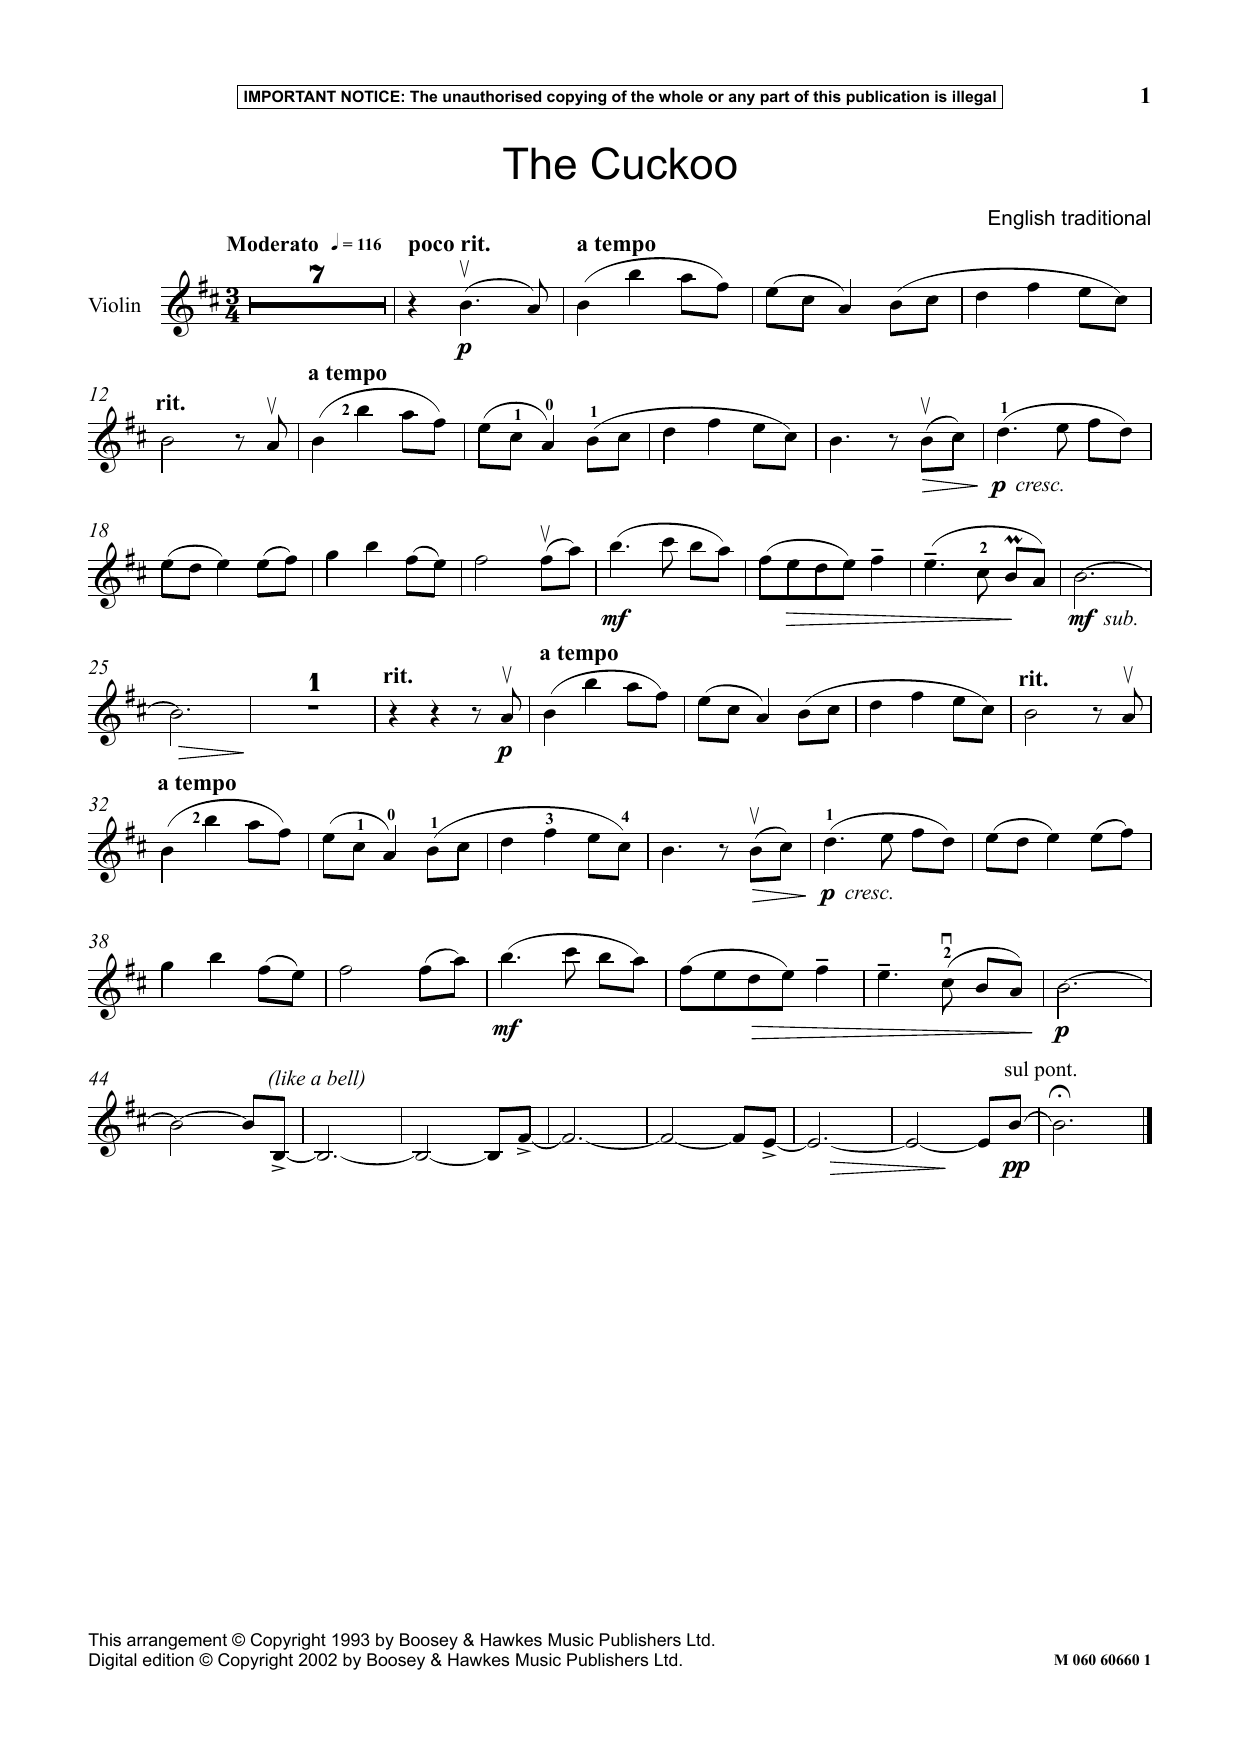 English Traditional "The Cuckoo" Sheet Music Notes Download Printable